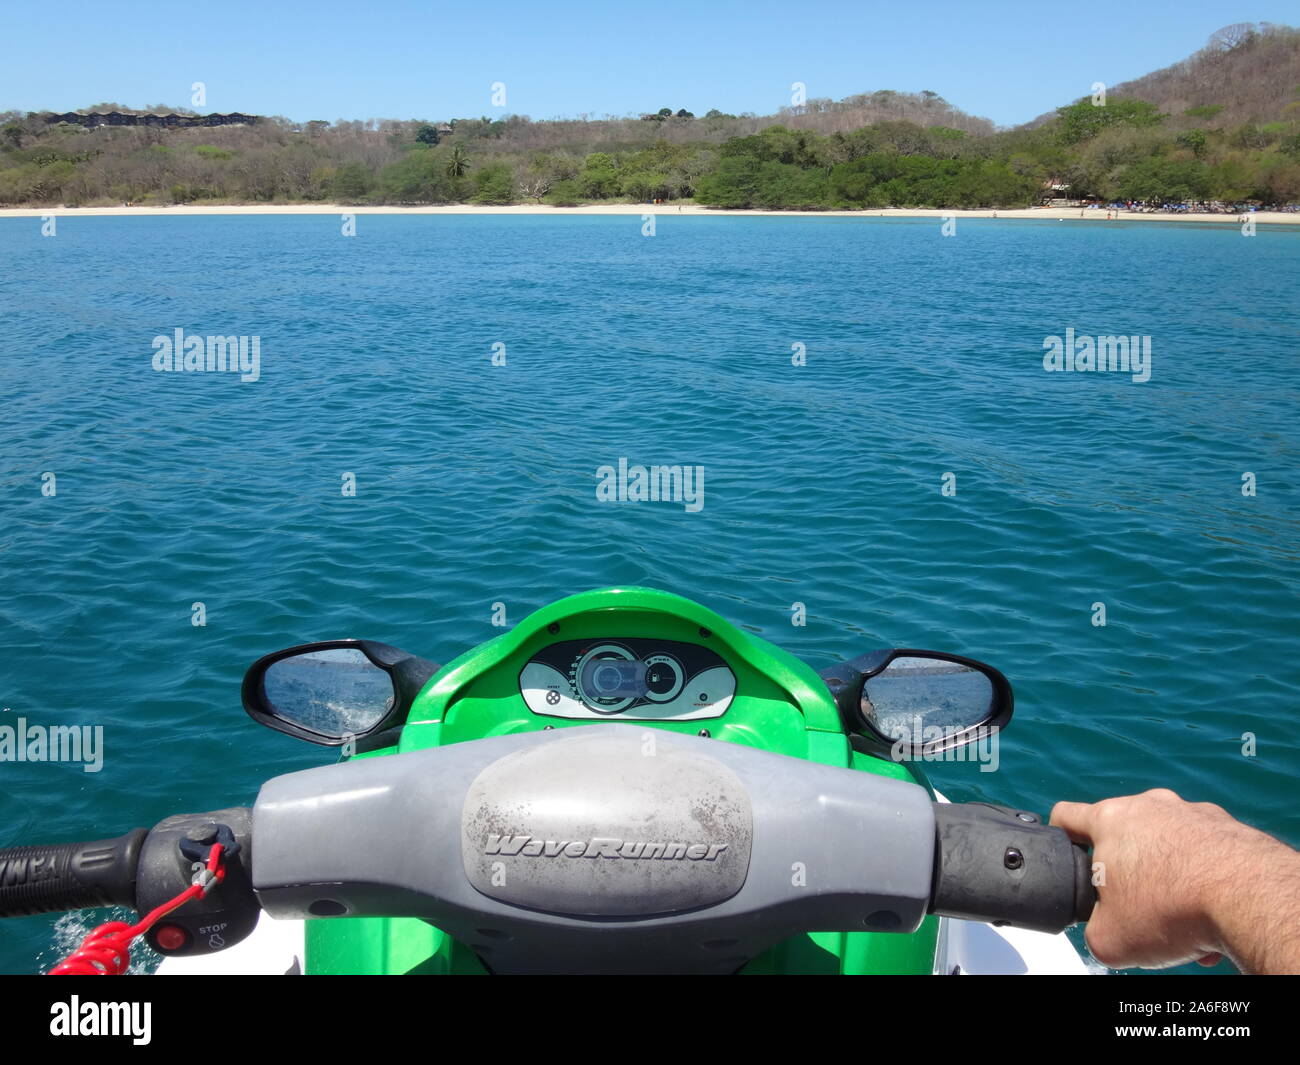 PAPAGAYO, COSTA RICA -20 MAR 2019- Driving a jet ski watercraft on the Pacific Ocean in Costa Rica. Jet skis, first introduced in 1972, are popular re Stock Photo